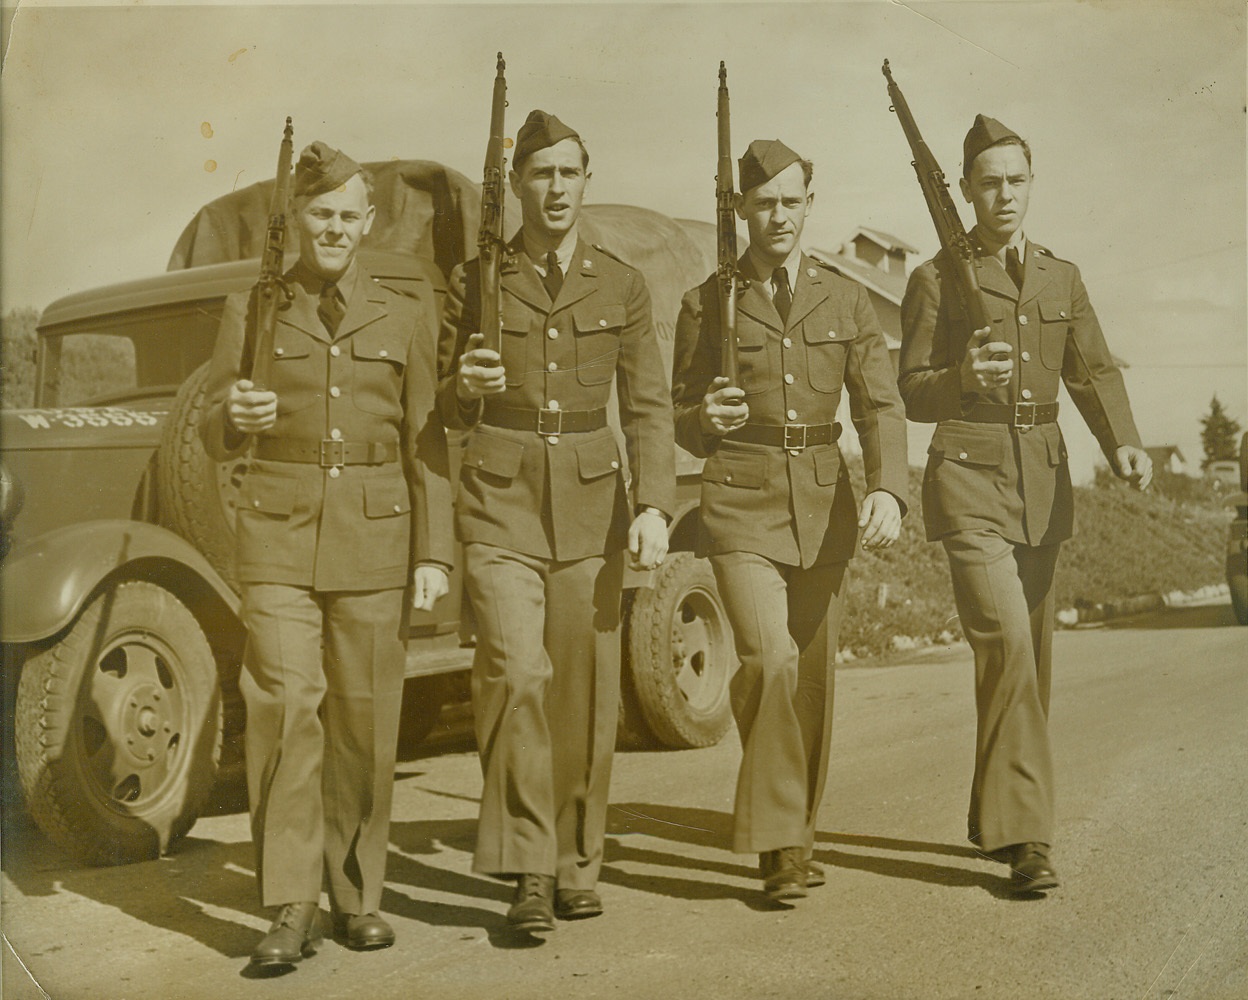 Four of a Kind, 2/6/41  FORT MAC ARTHUR, SAN PEDRO, CALIF. – We’re in the Army now and like it. Such is the talk of the four Carson brothers. Wayne, Samuel and Alfred Carson enlisted last October. The fourth just joined up, and now they plan for the fifth brother to enlist. Photo shows: (left to right) William L. 28, Wayne Q. 25, Samuel M. 20, and Alfred J. Carson, 18. The brothers are members of the 69th Quarter master Battalion at Fort MacArthur. Credit: (ACME);